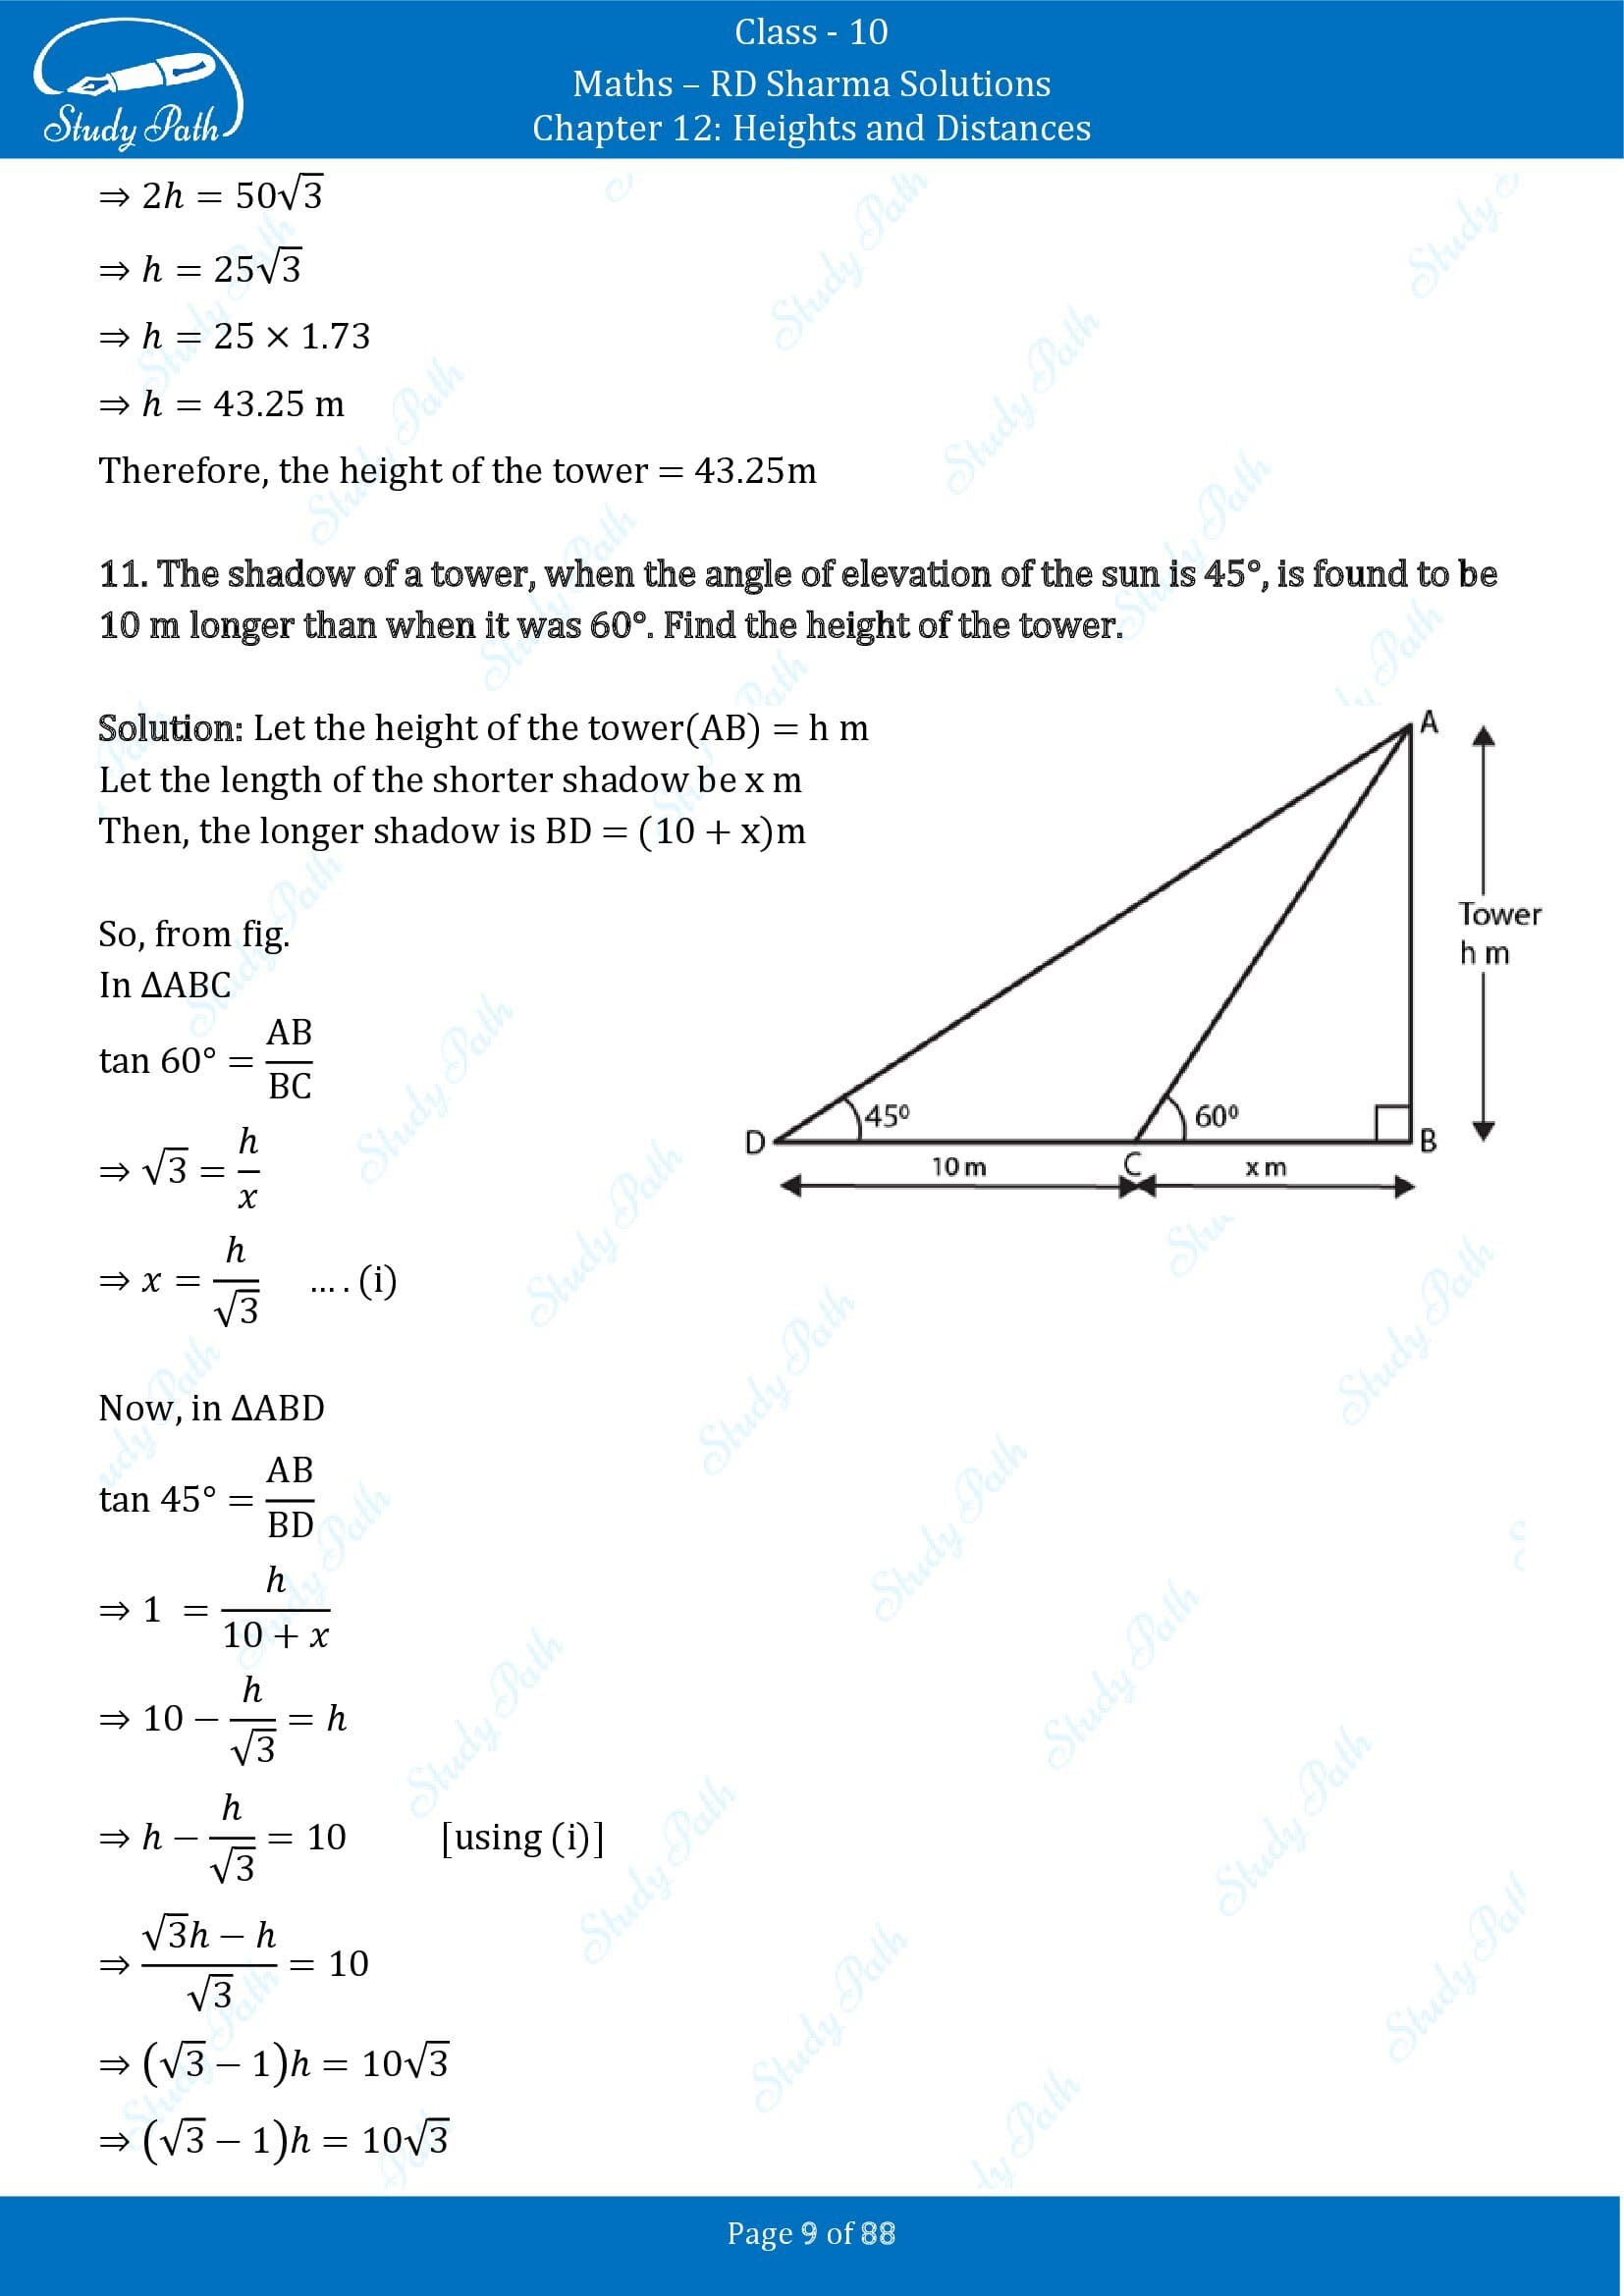 RD Sharma Solutions Class 10 Chapter 12 Heights and Distances Exercise 12.1 00009